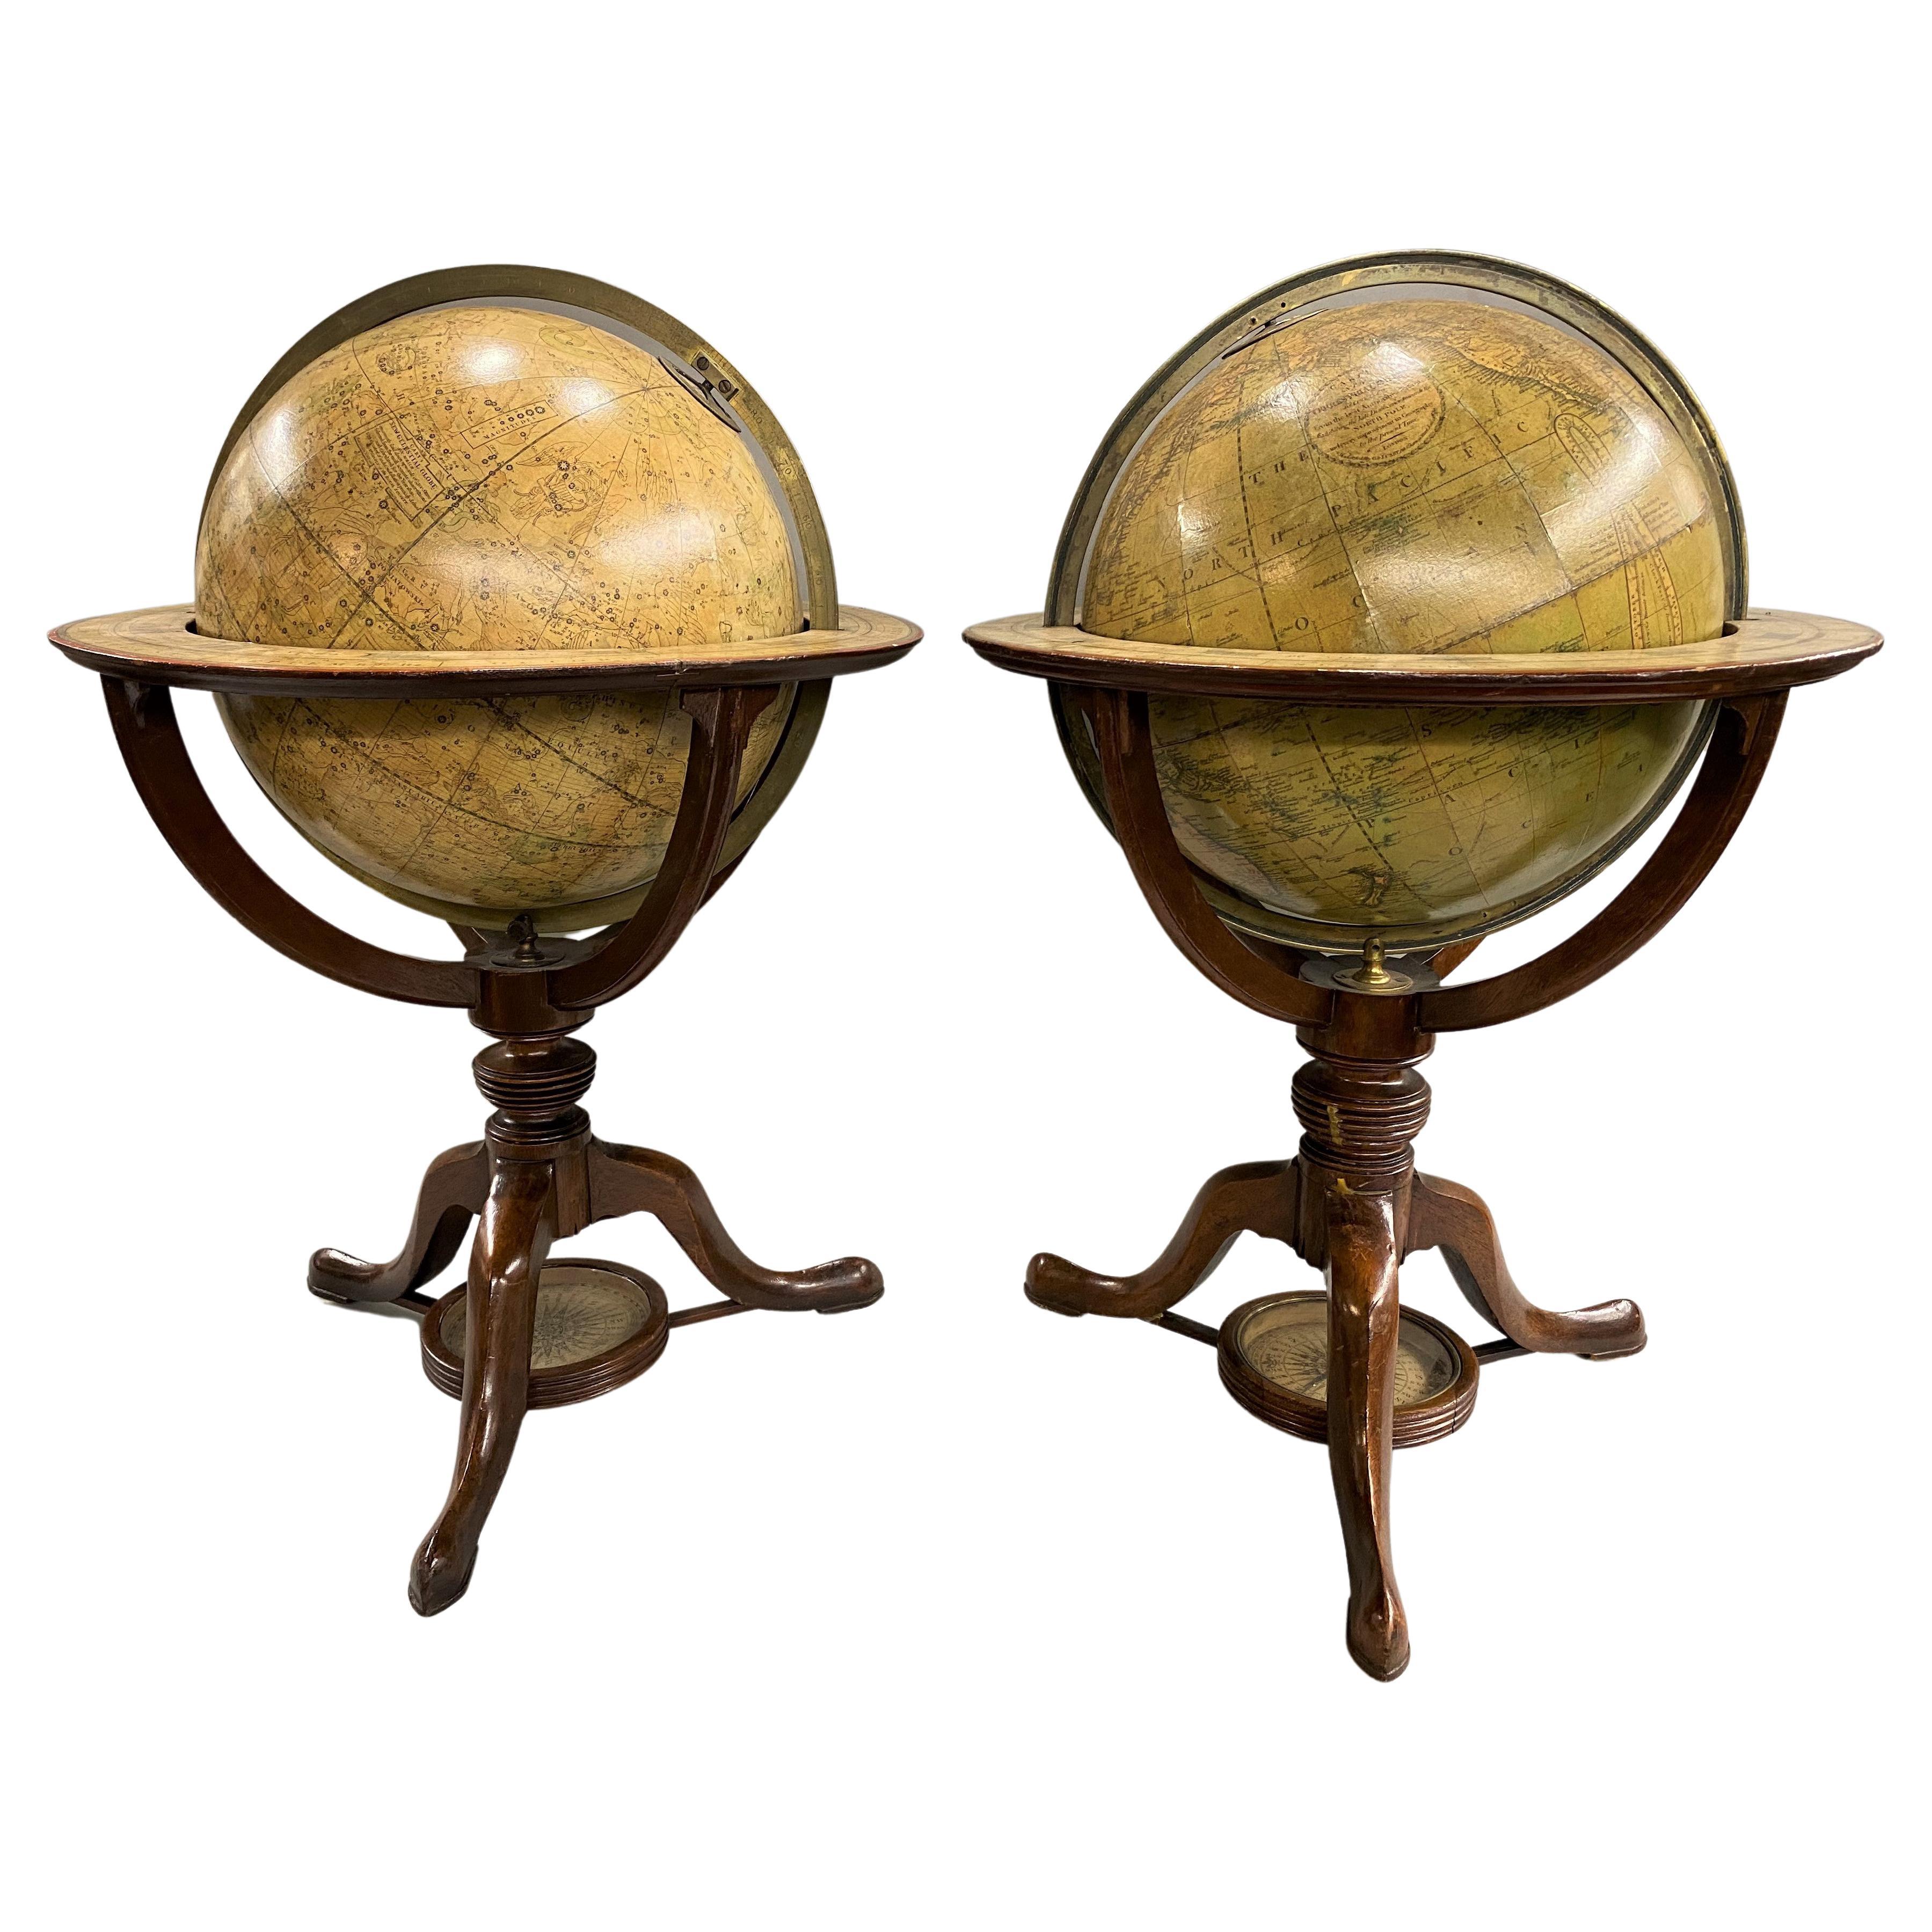 Pair of Early 19th C Cary Celestial & Terrestrial Tabletop Globes